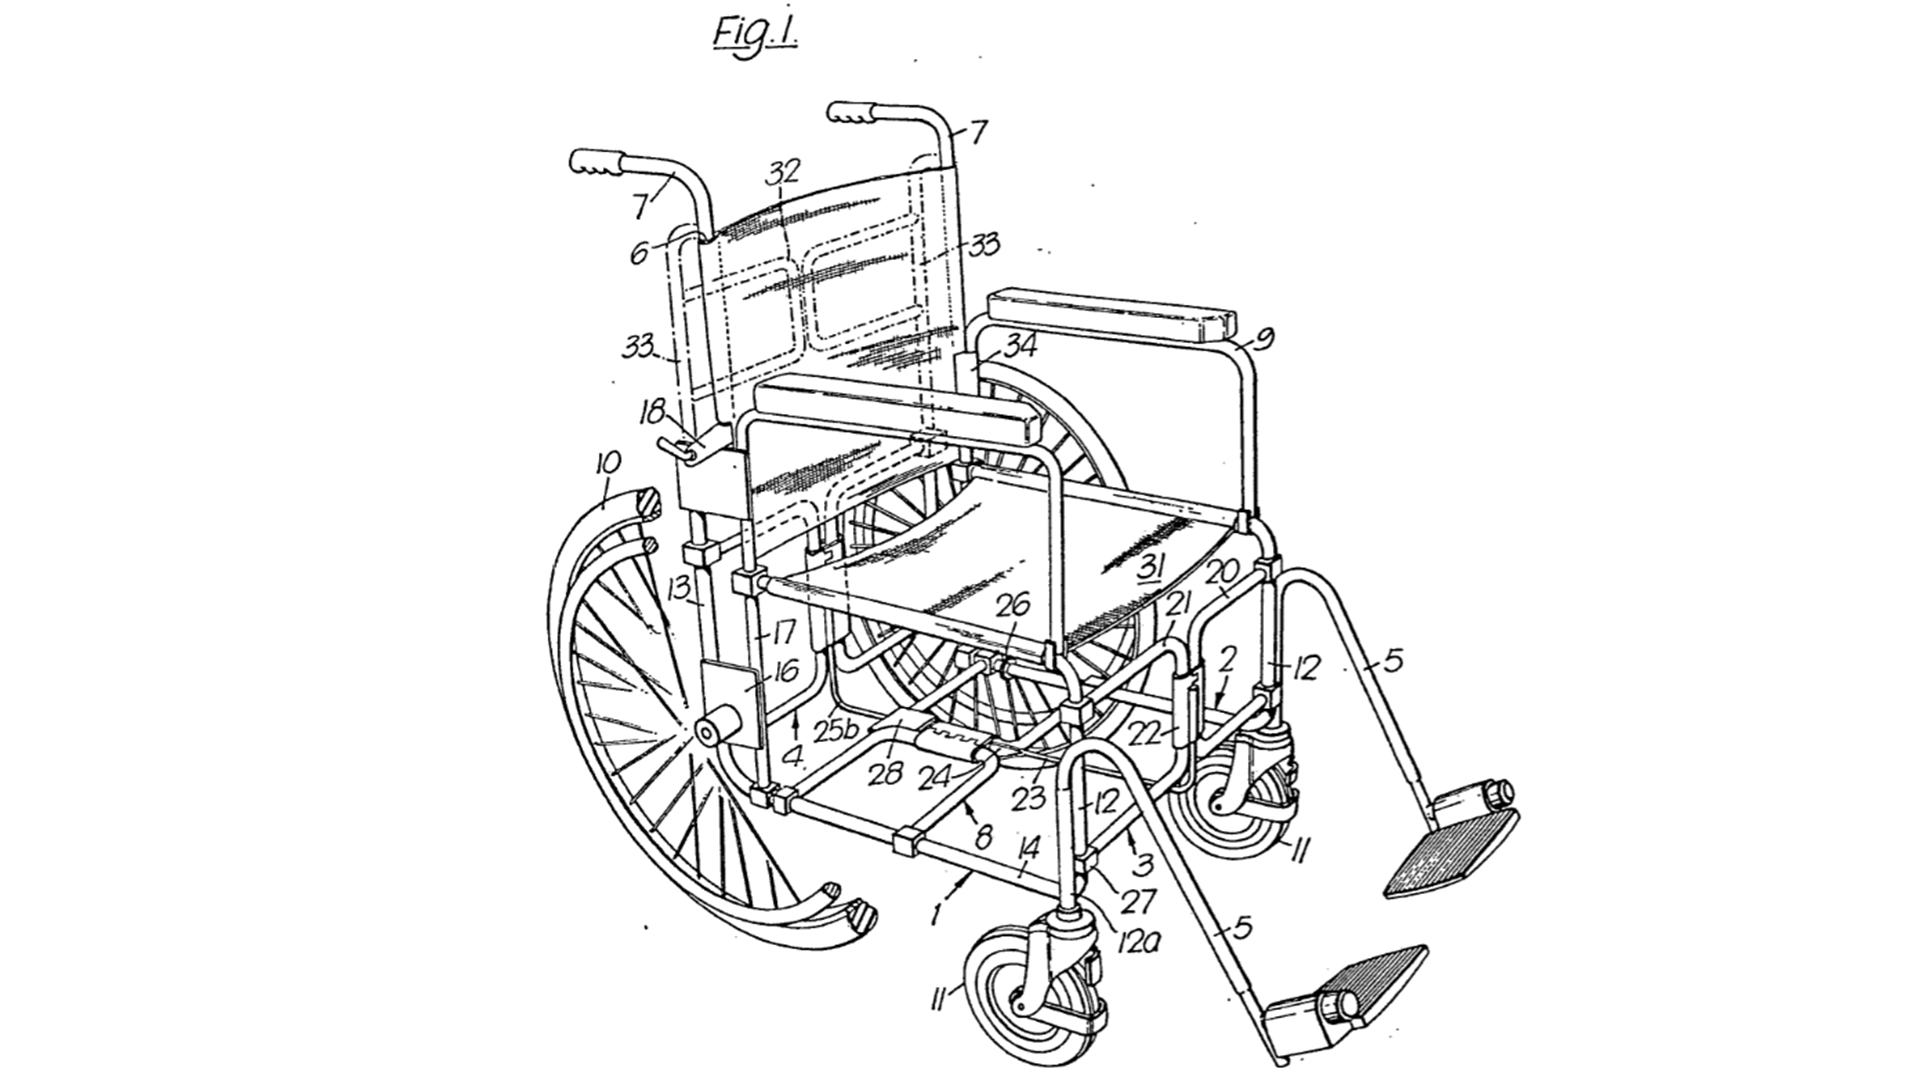 Folding wheelchair by Patrick Williams in 1978